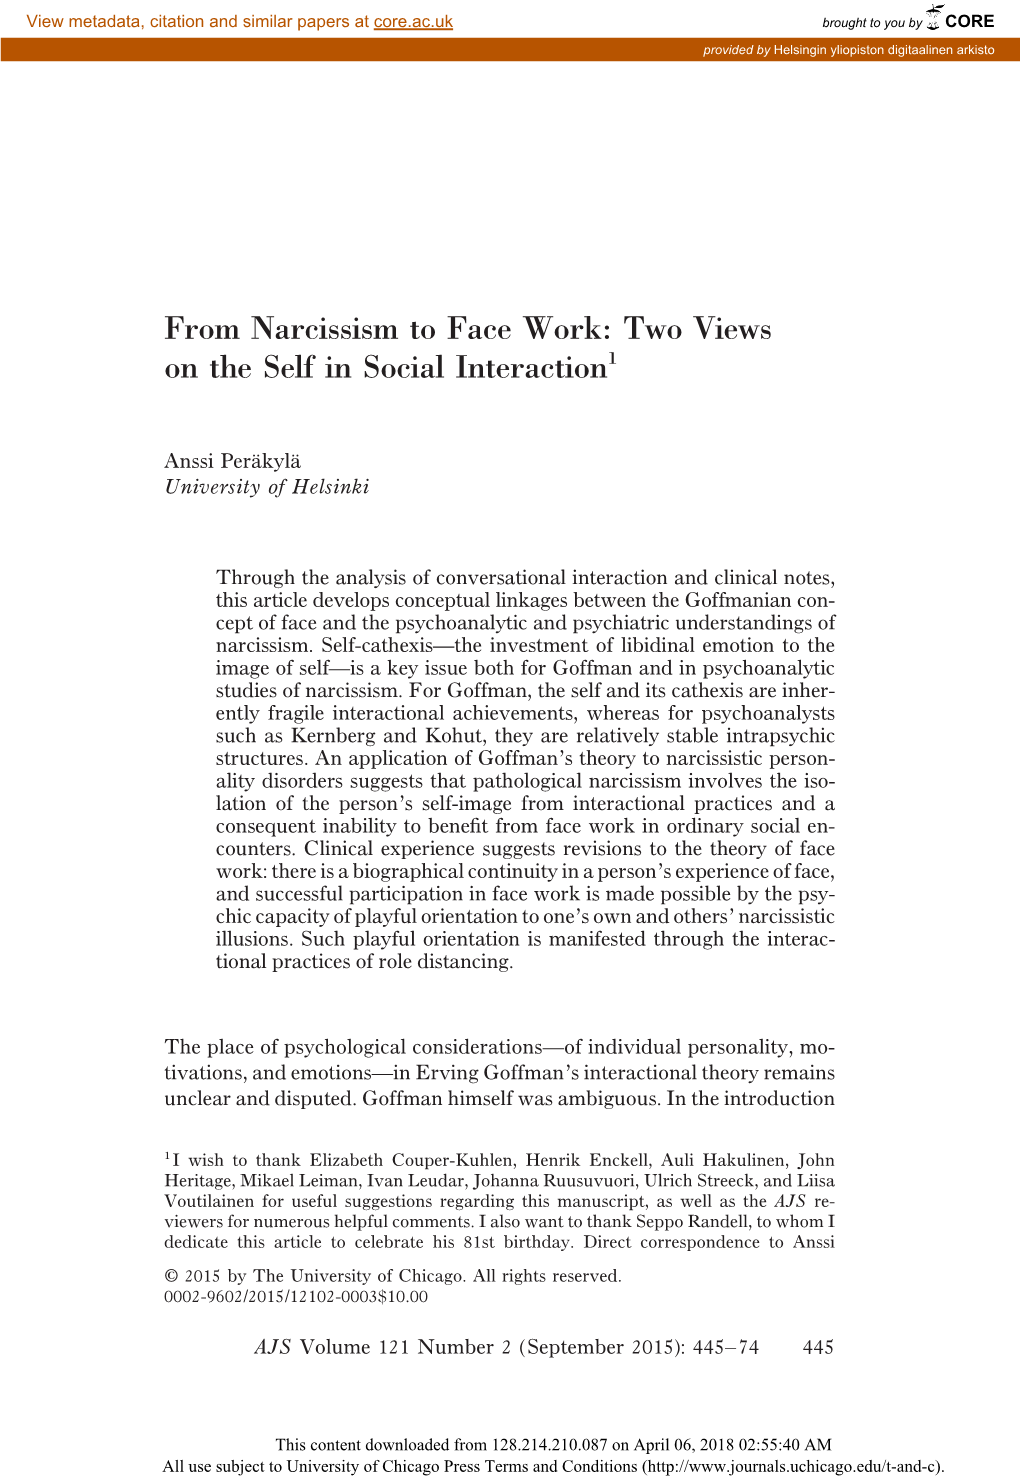 From Narcissism to Face Work: Two Views on the Self in Social Interaction1